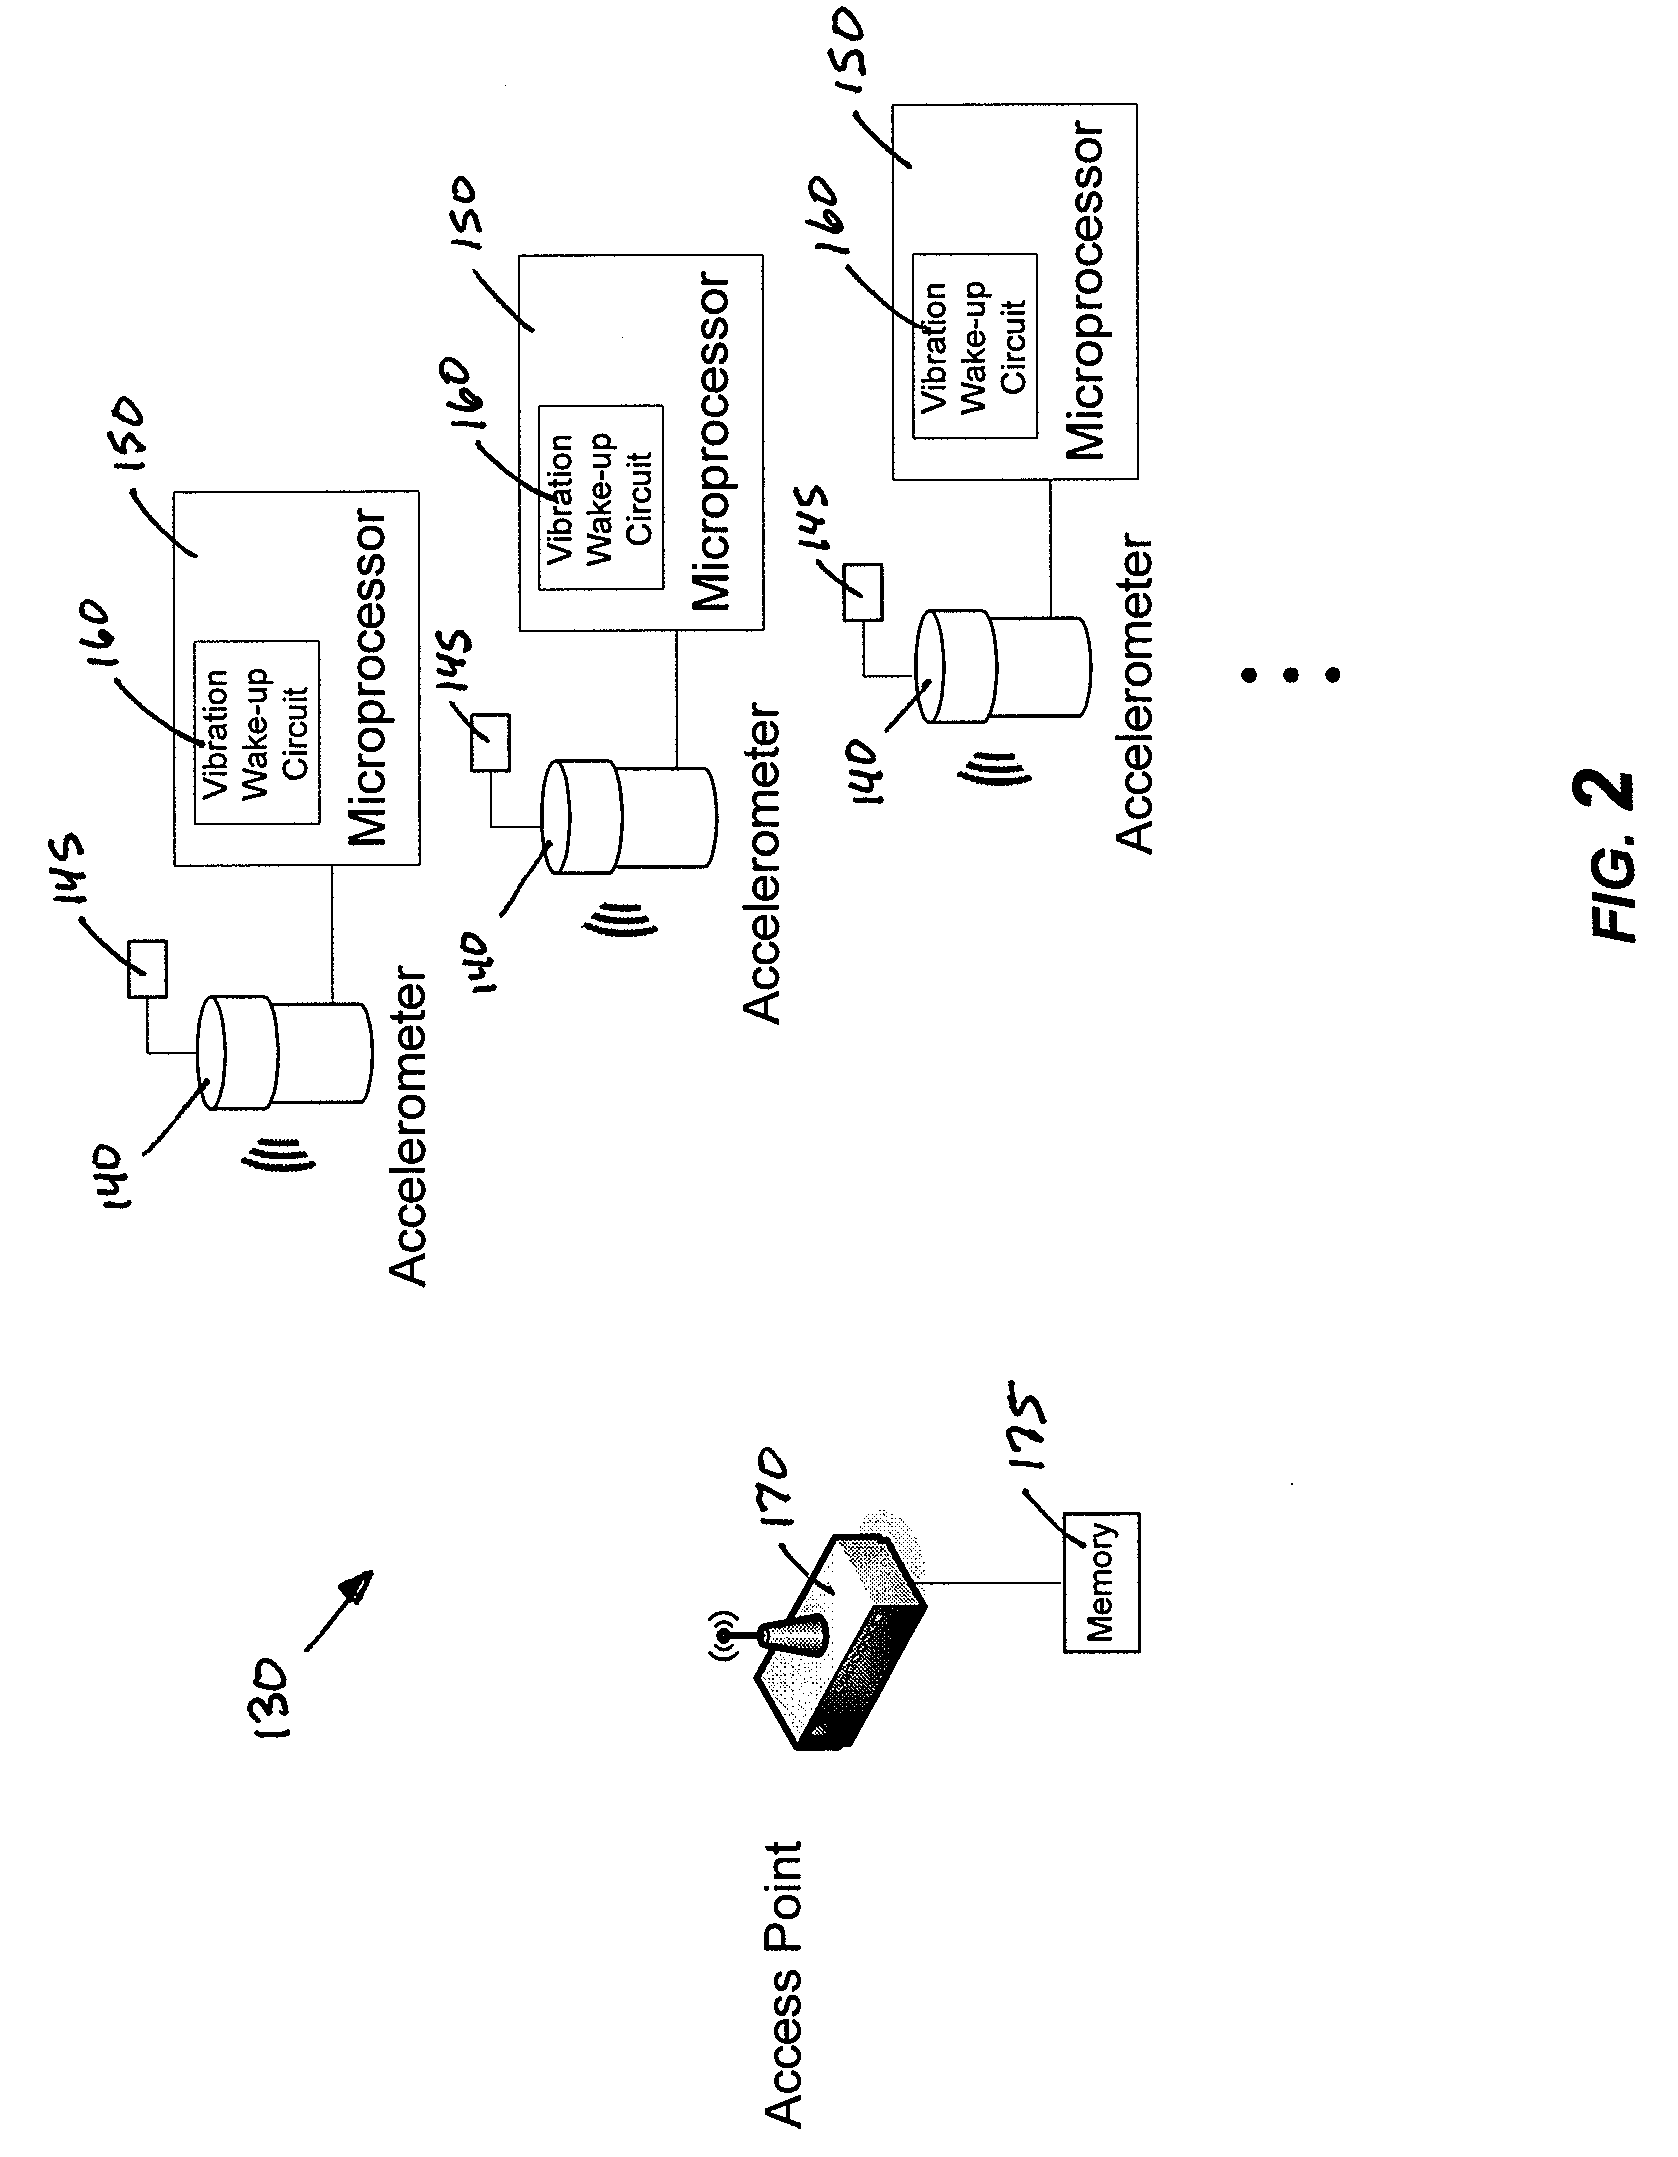 Vehicle health and usage monitoring system and method